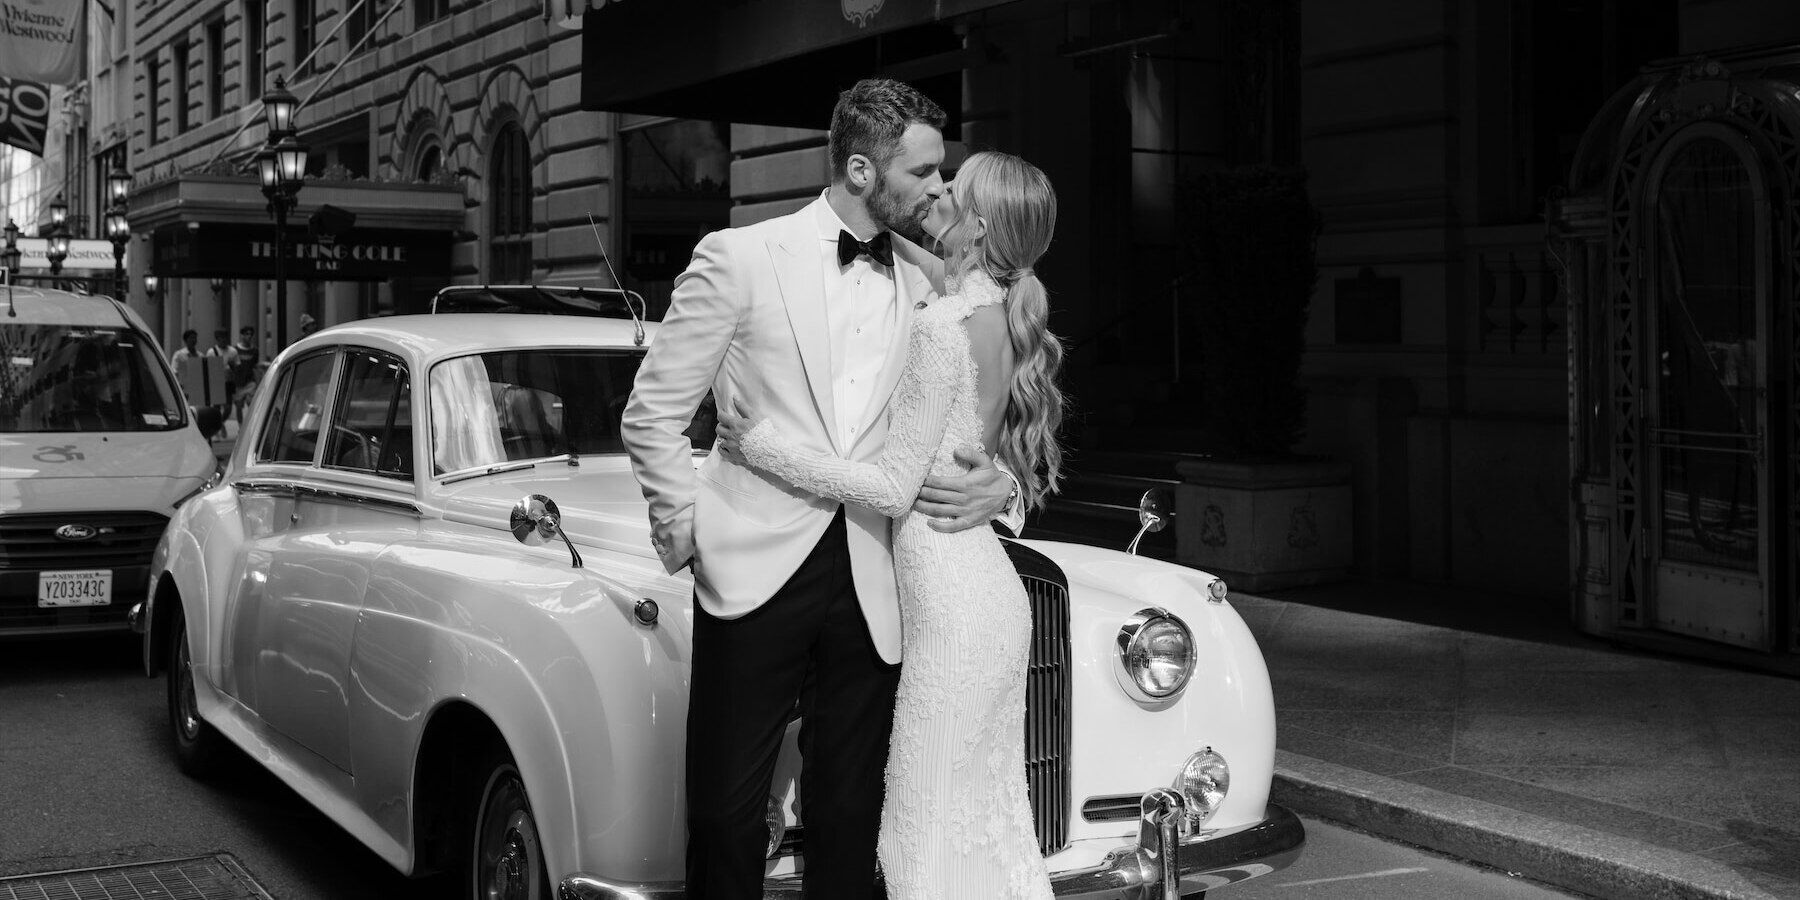 Kate Bock Kevin Love Wedding: Model Kate Bock and NBA star Kevin Love kissing on their wedding day.